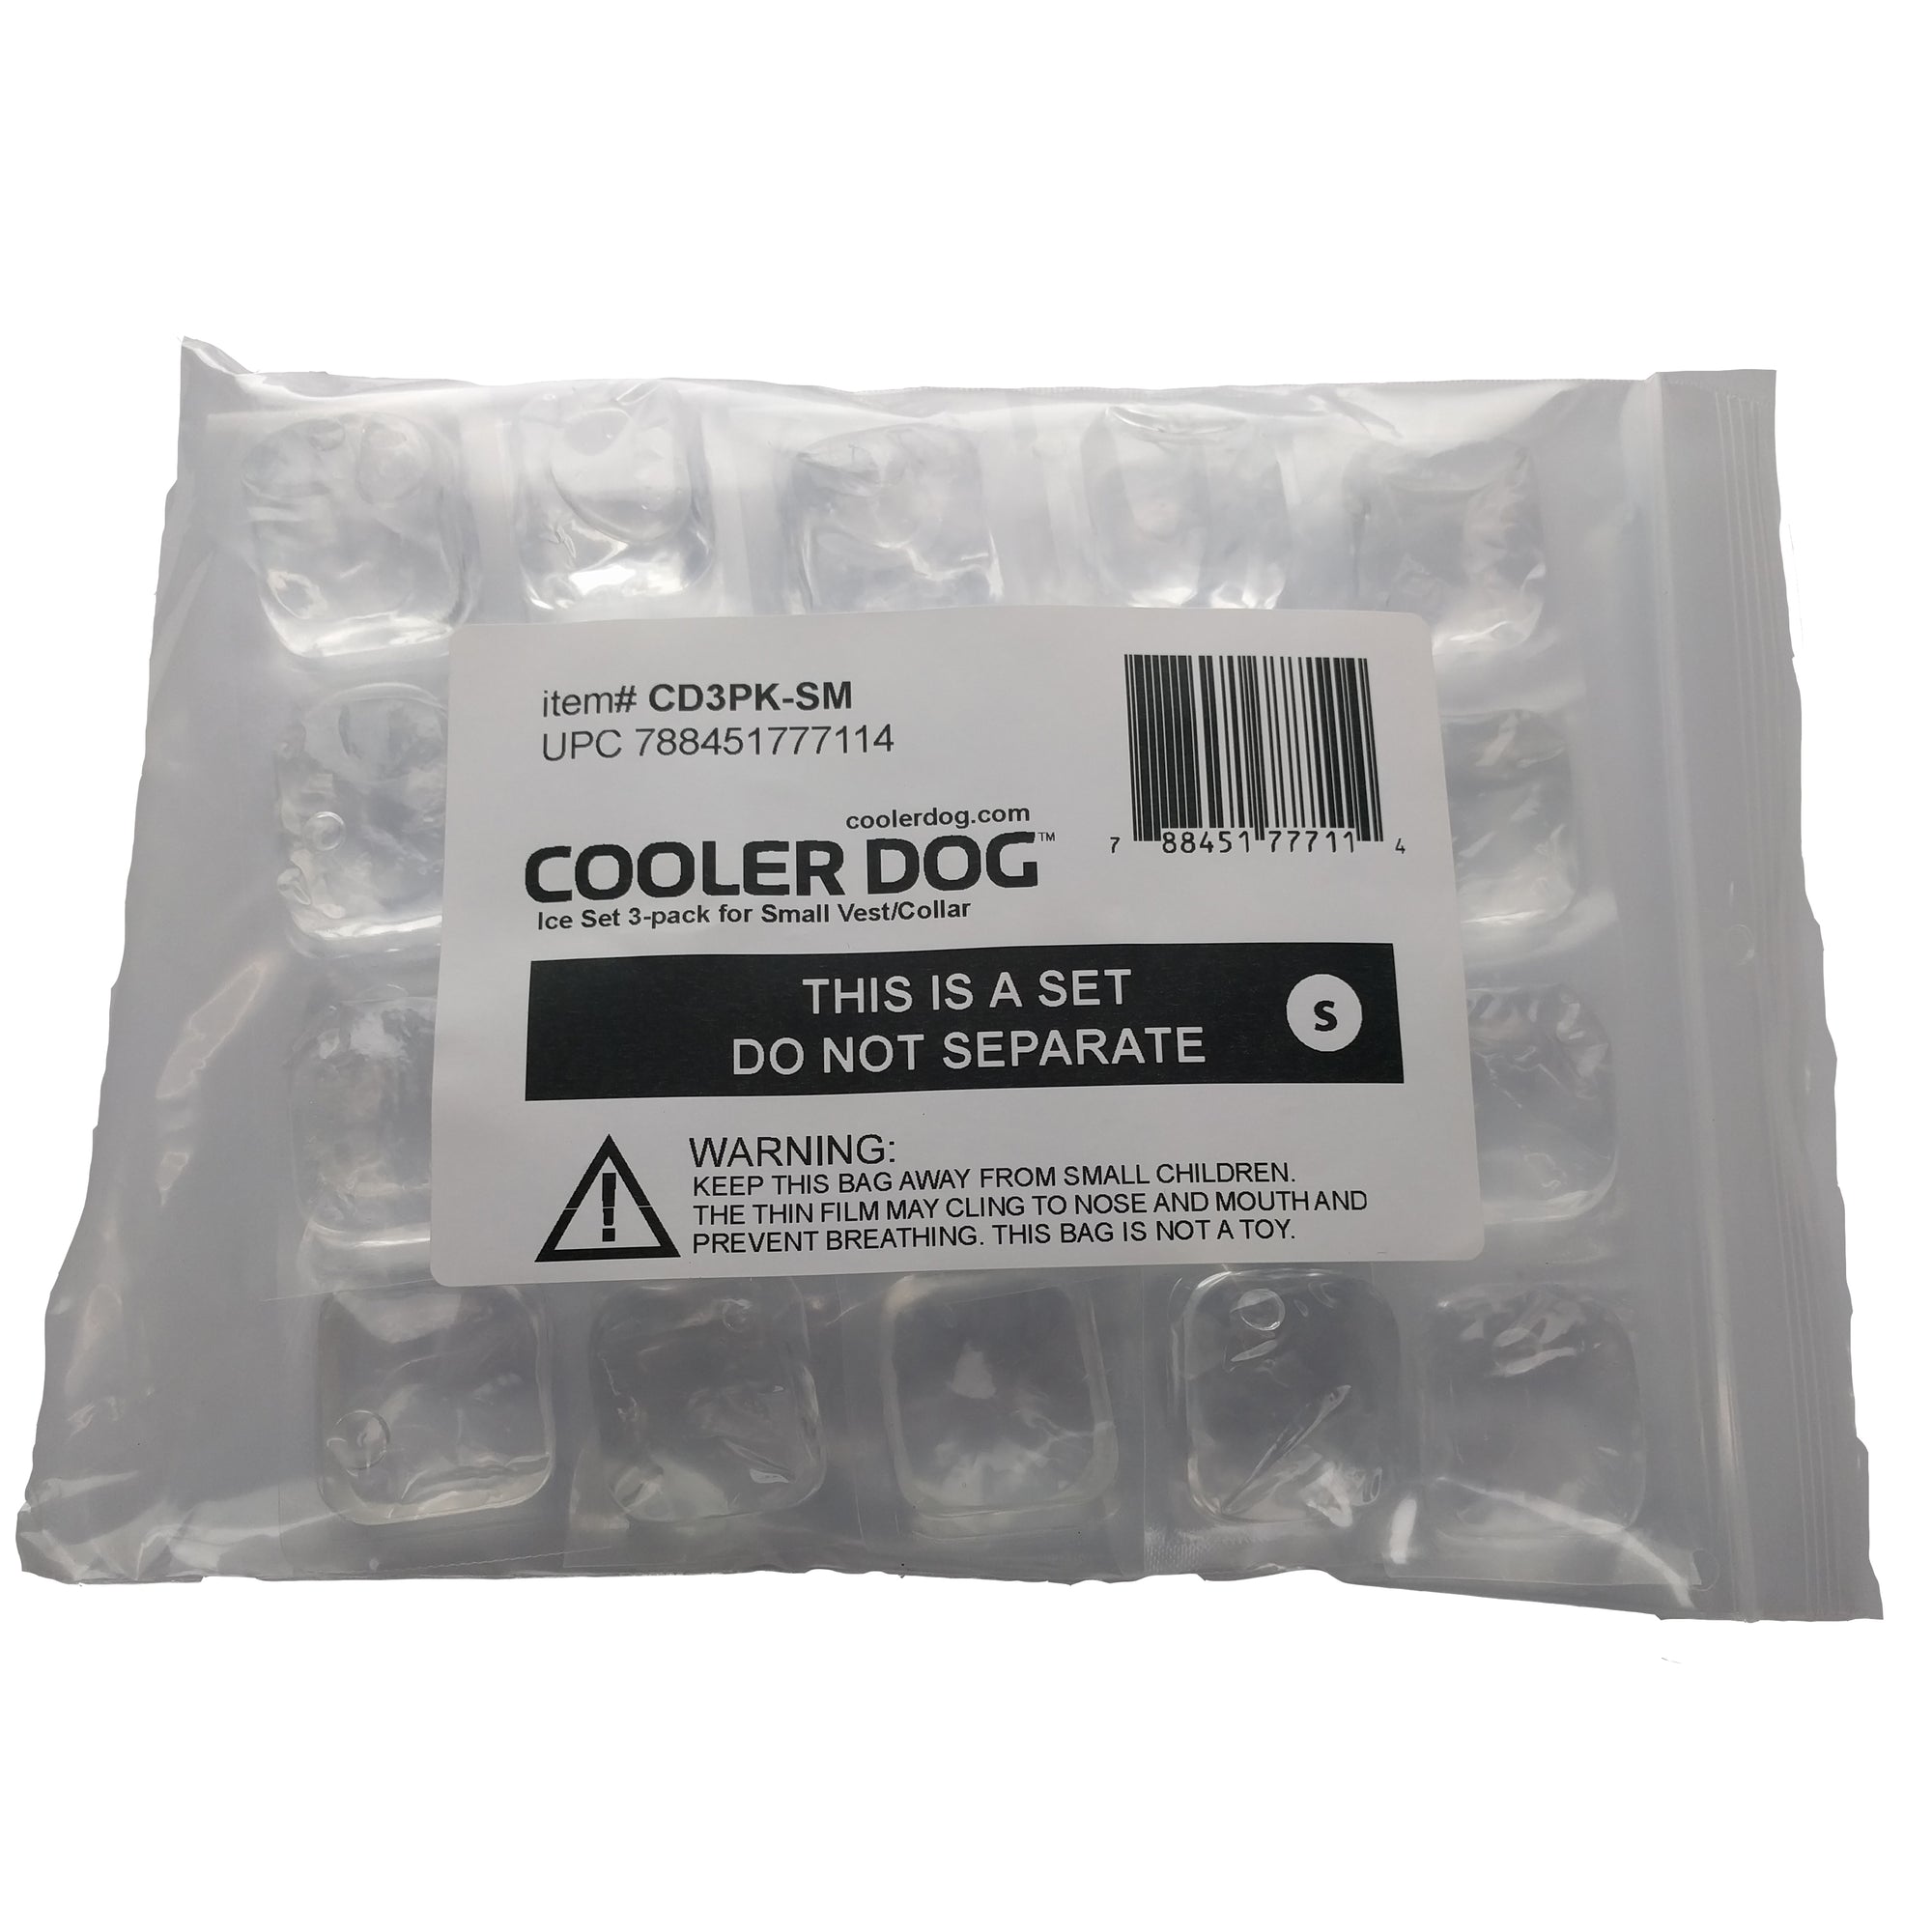 Packaged product of CoolerDog vest/collar refill ice in packaging bag